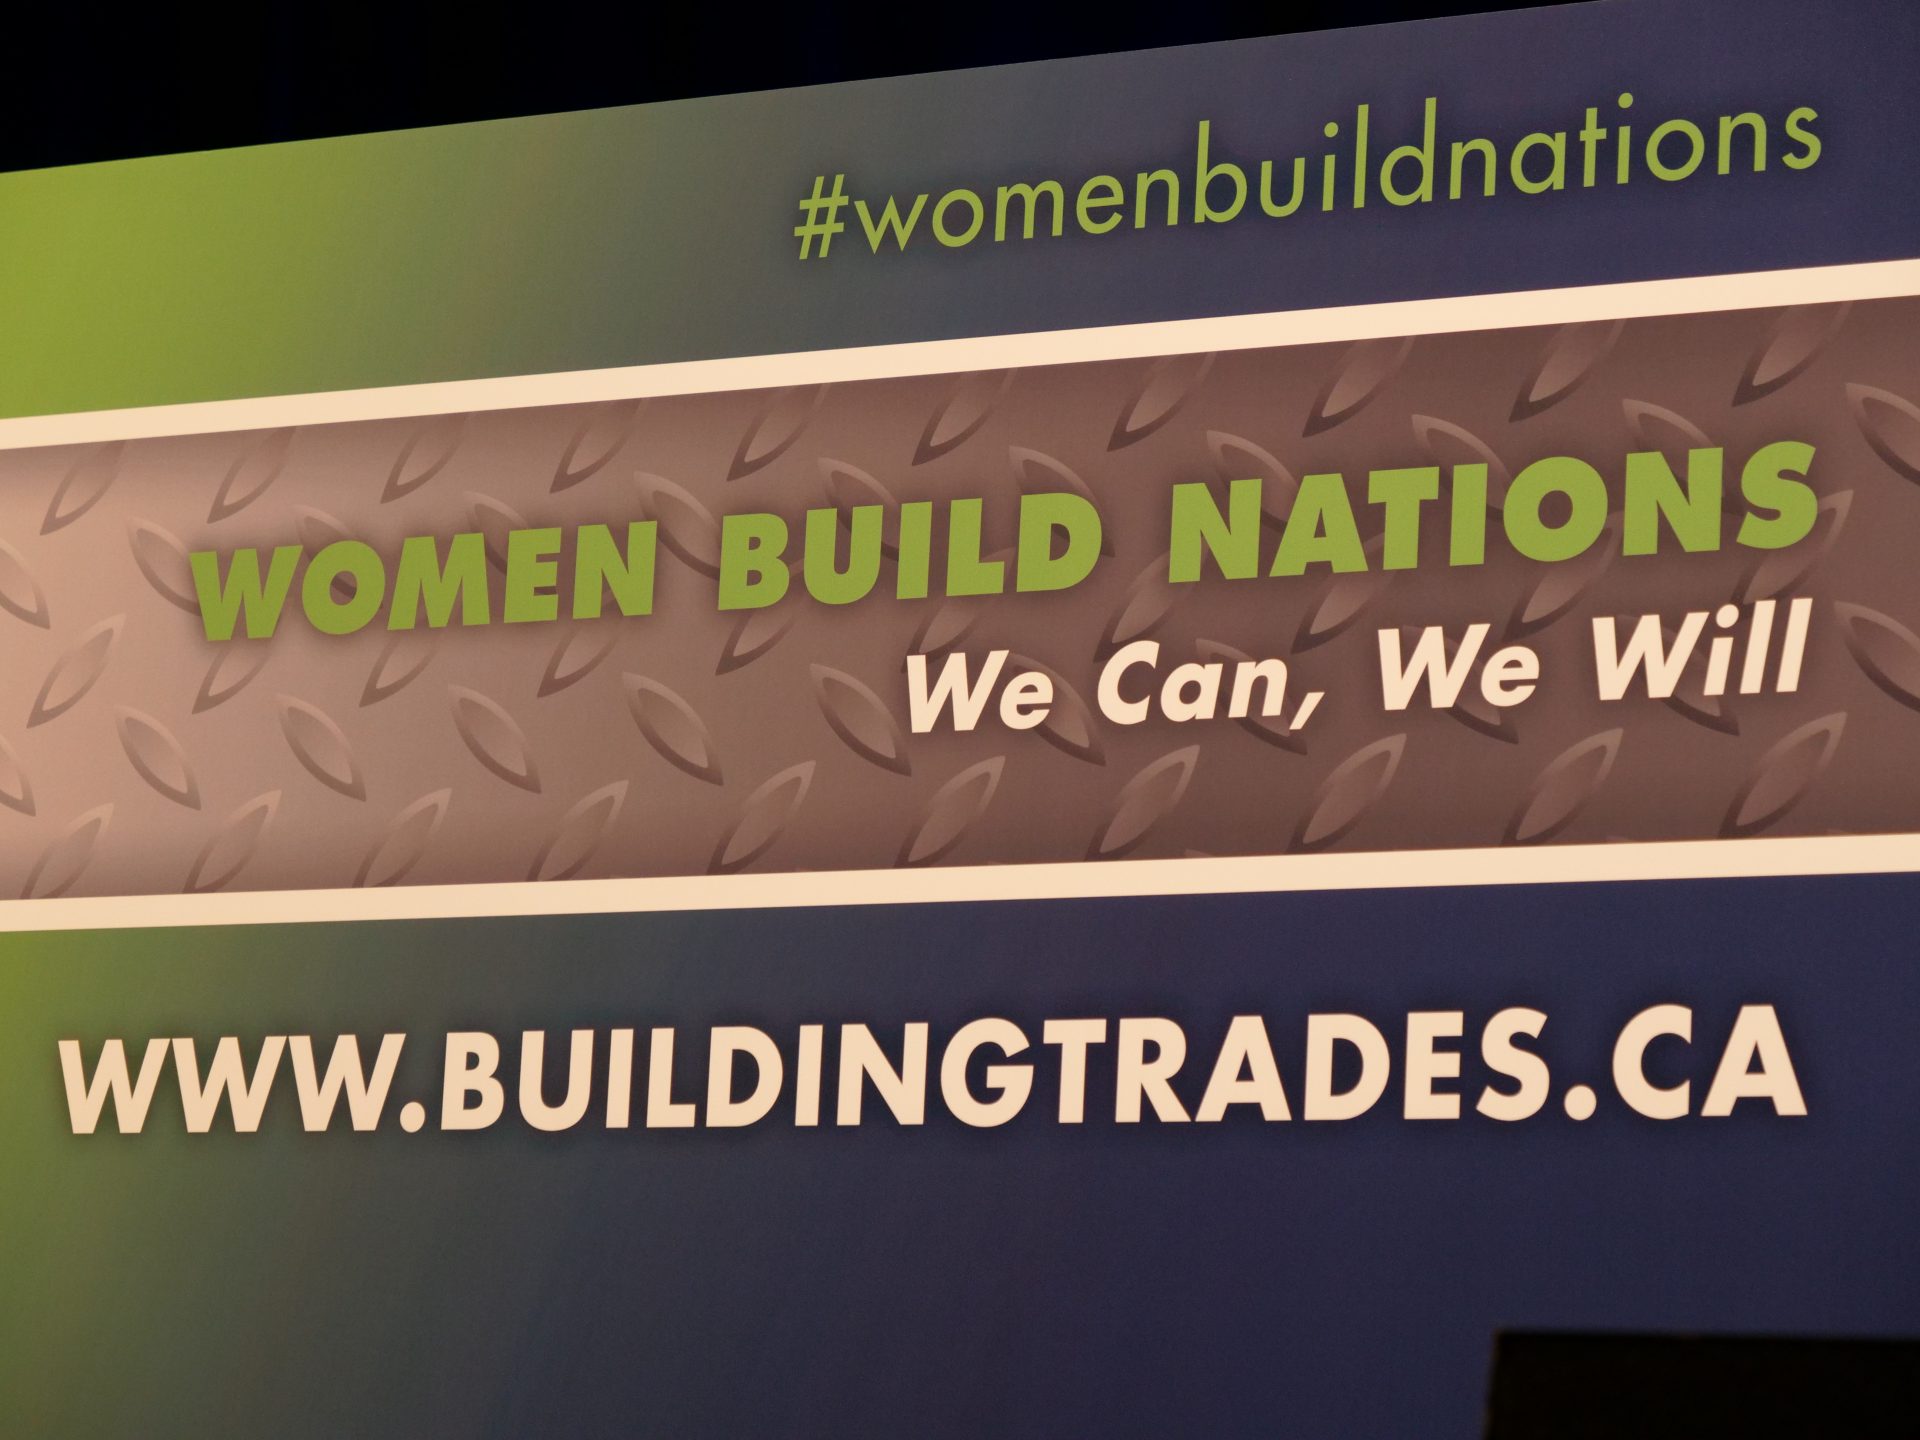 Image from the Gallery: Women Build Nations Conference – Seattle, WA